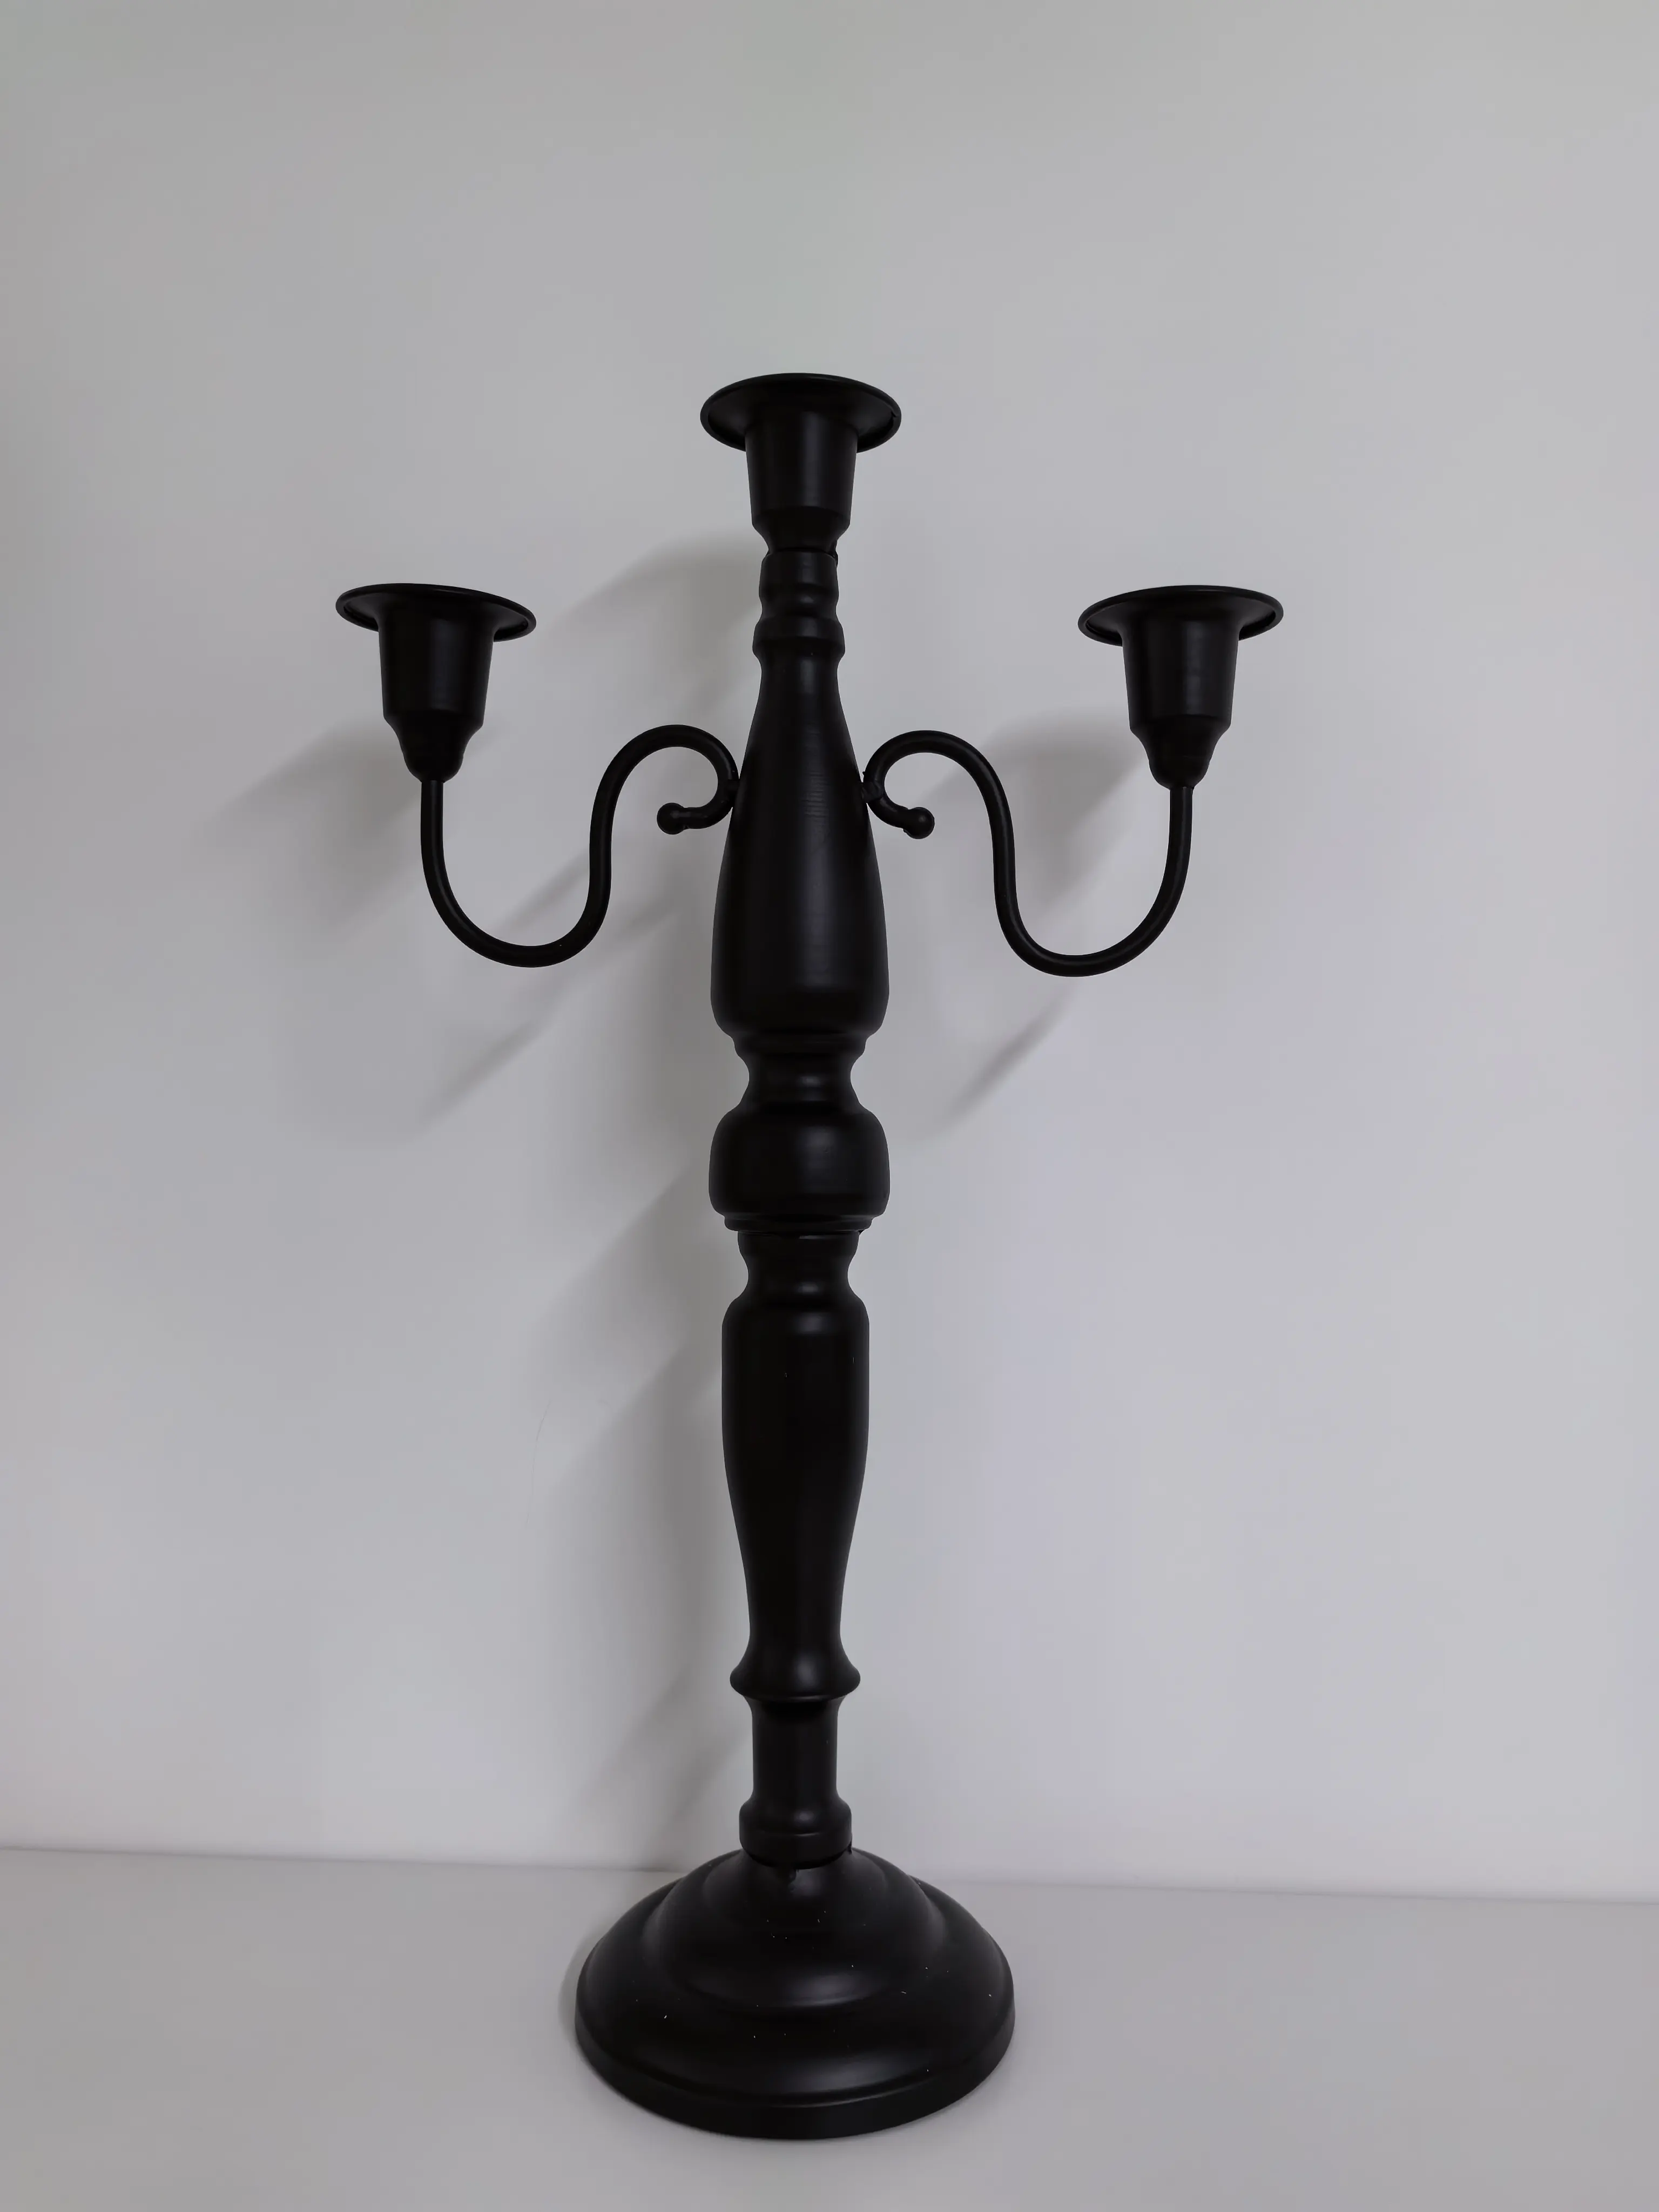 Supplier Black Candelabra Centerpieces Frosted Minimalist Function Metal Candlestick